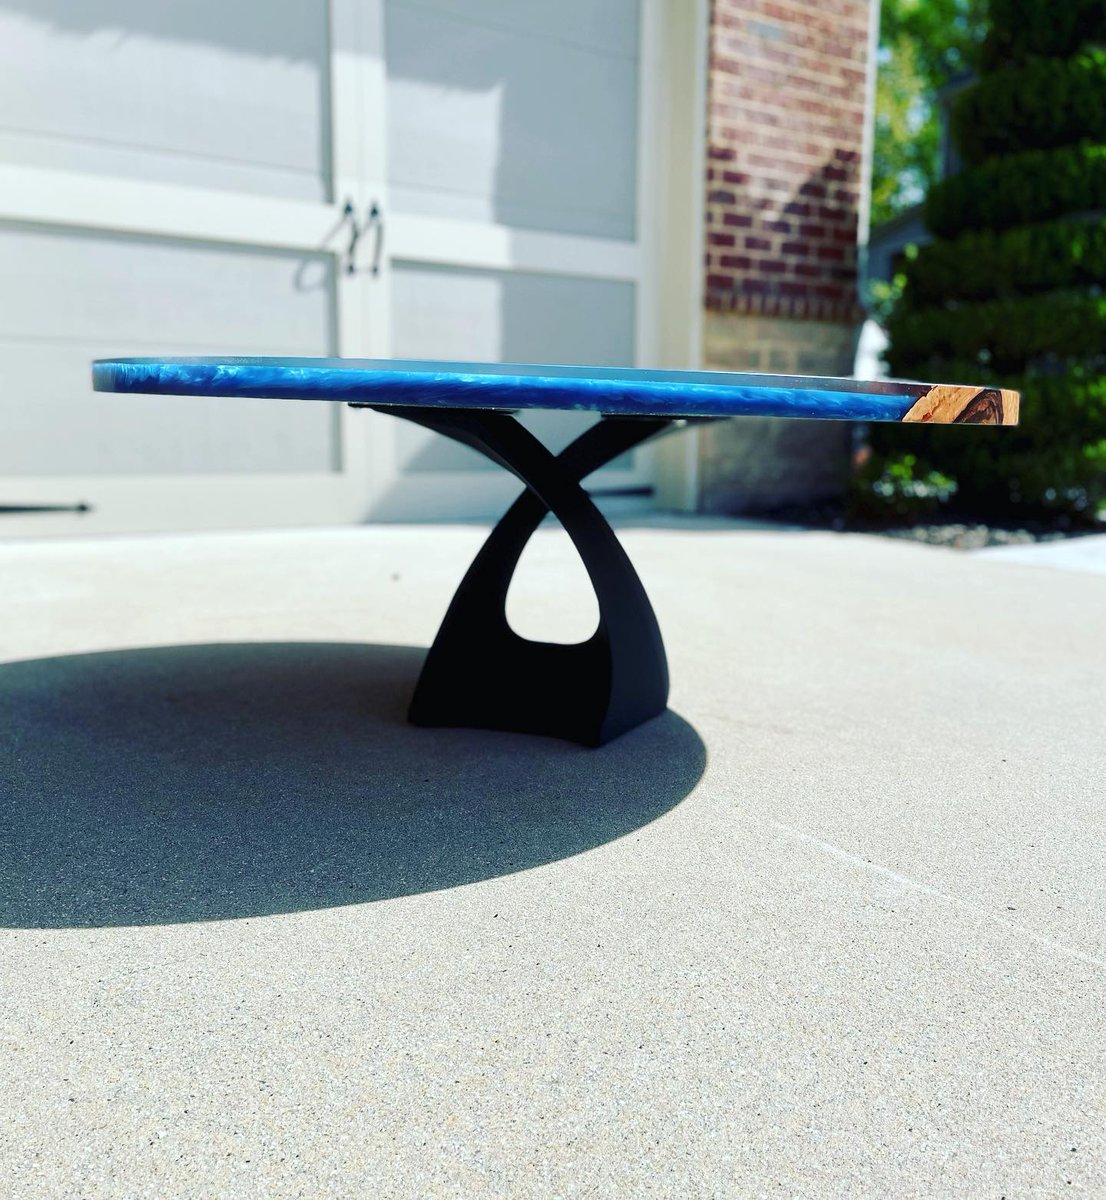 There is something permanent, and extremely profound is having an amazing Tulipe base in the corner
In which we can get the sunbathing and enjoy home

𝐒𝐡𝐨𝐩 𝐡𝐞𝐫𝐞: flowyline.com/collections/de…

#flowylinedesign #tablebase #tabledesign #qualityfurniture #resintable